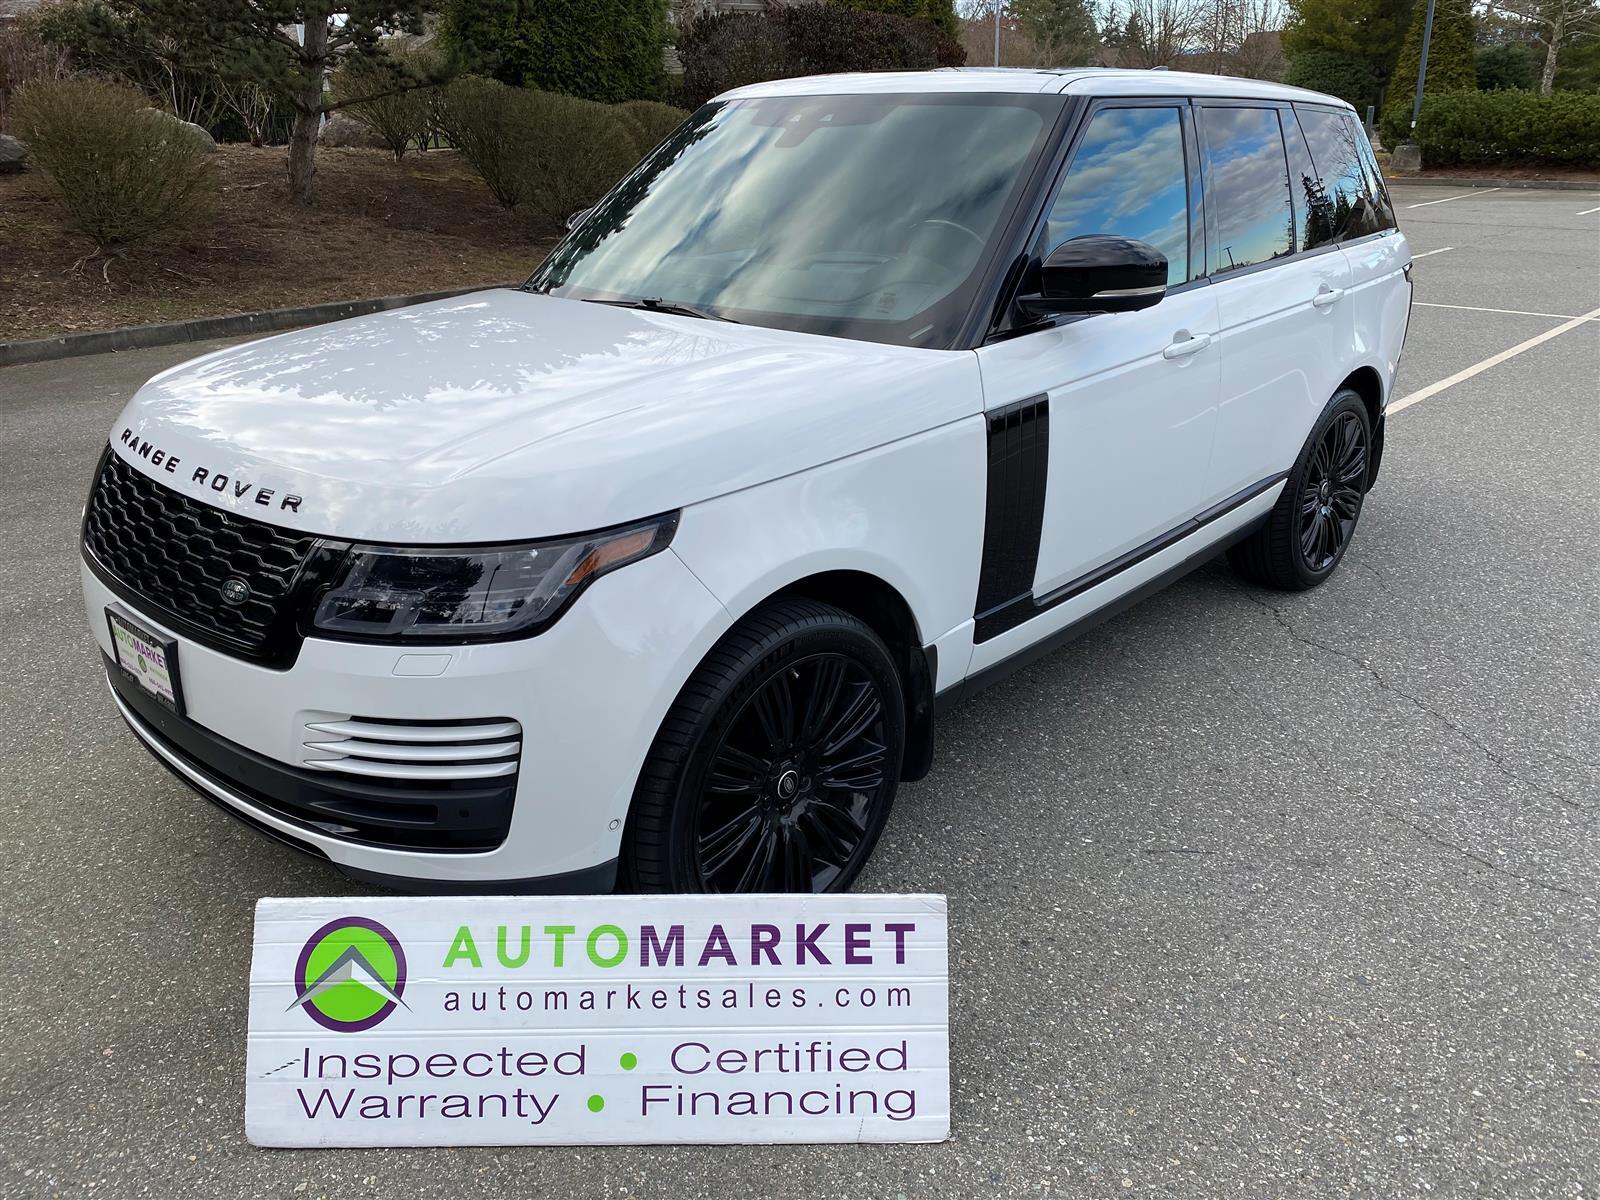 2019 Land Rover Range Rover IMMACULATE, SUPERCHARGED, SERVICED, FINANCING, WAR